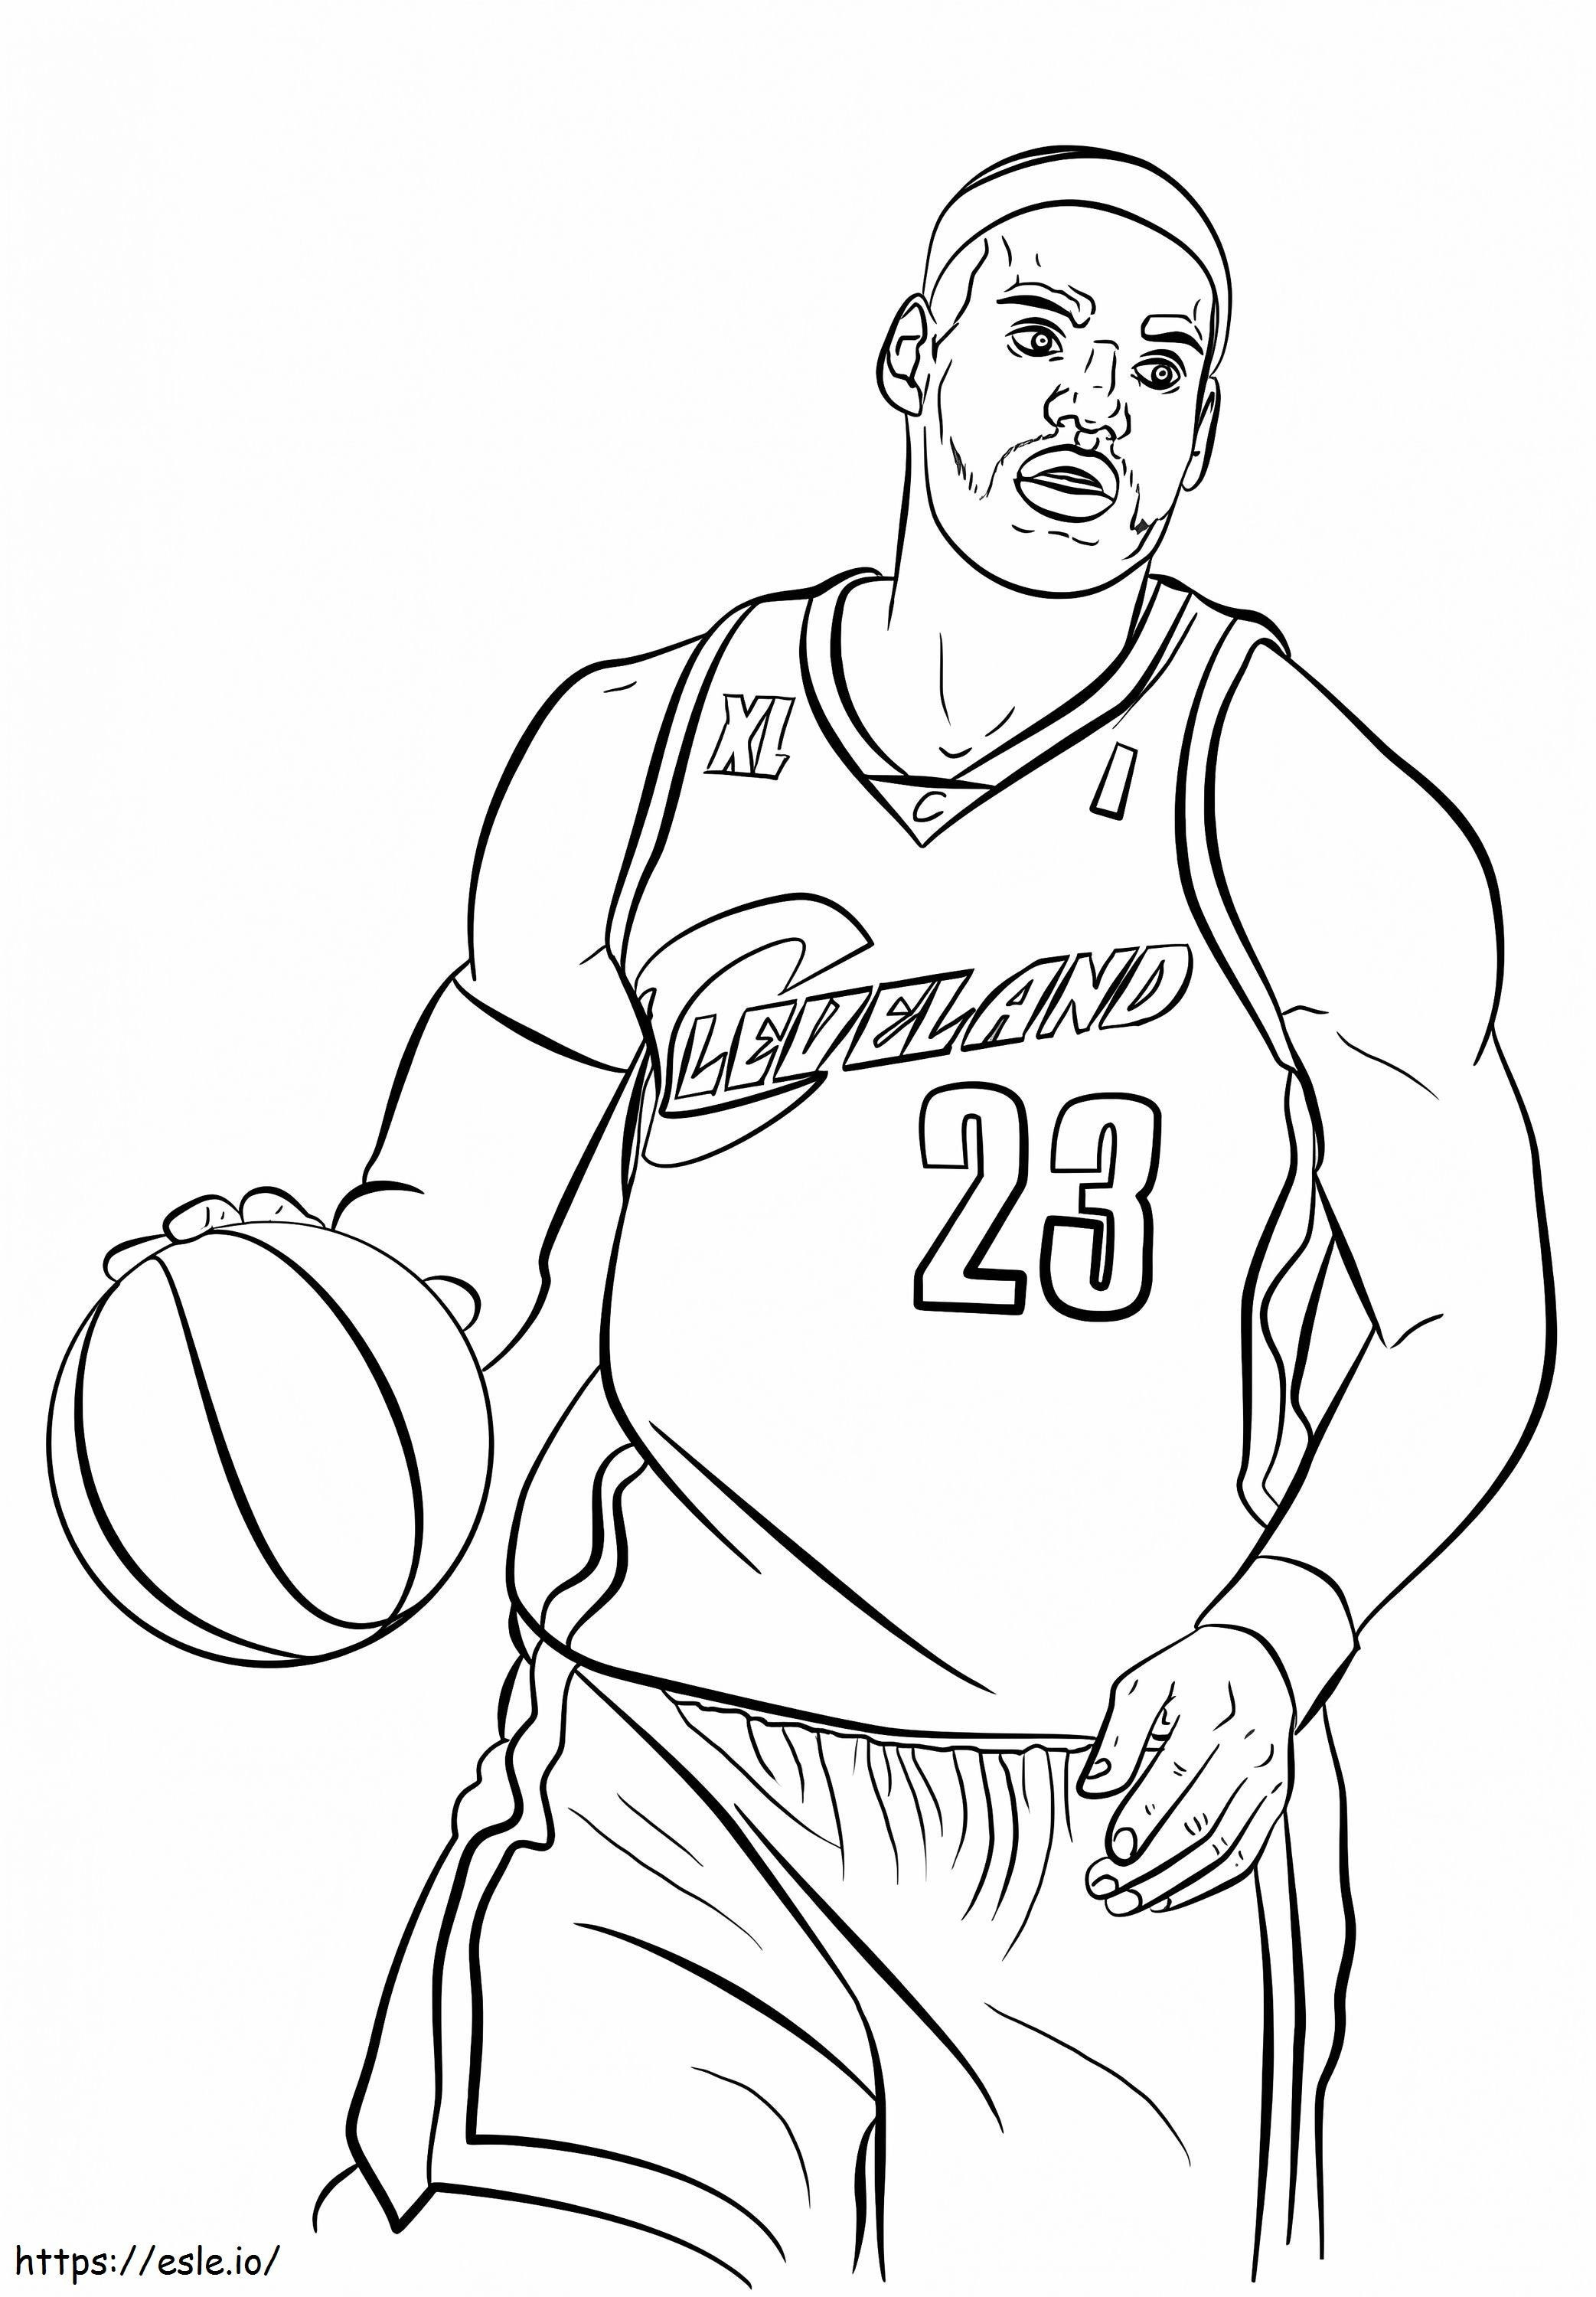 Cool LeBron James coloring page